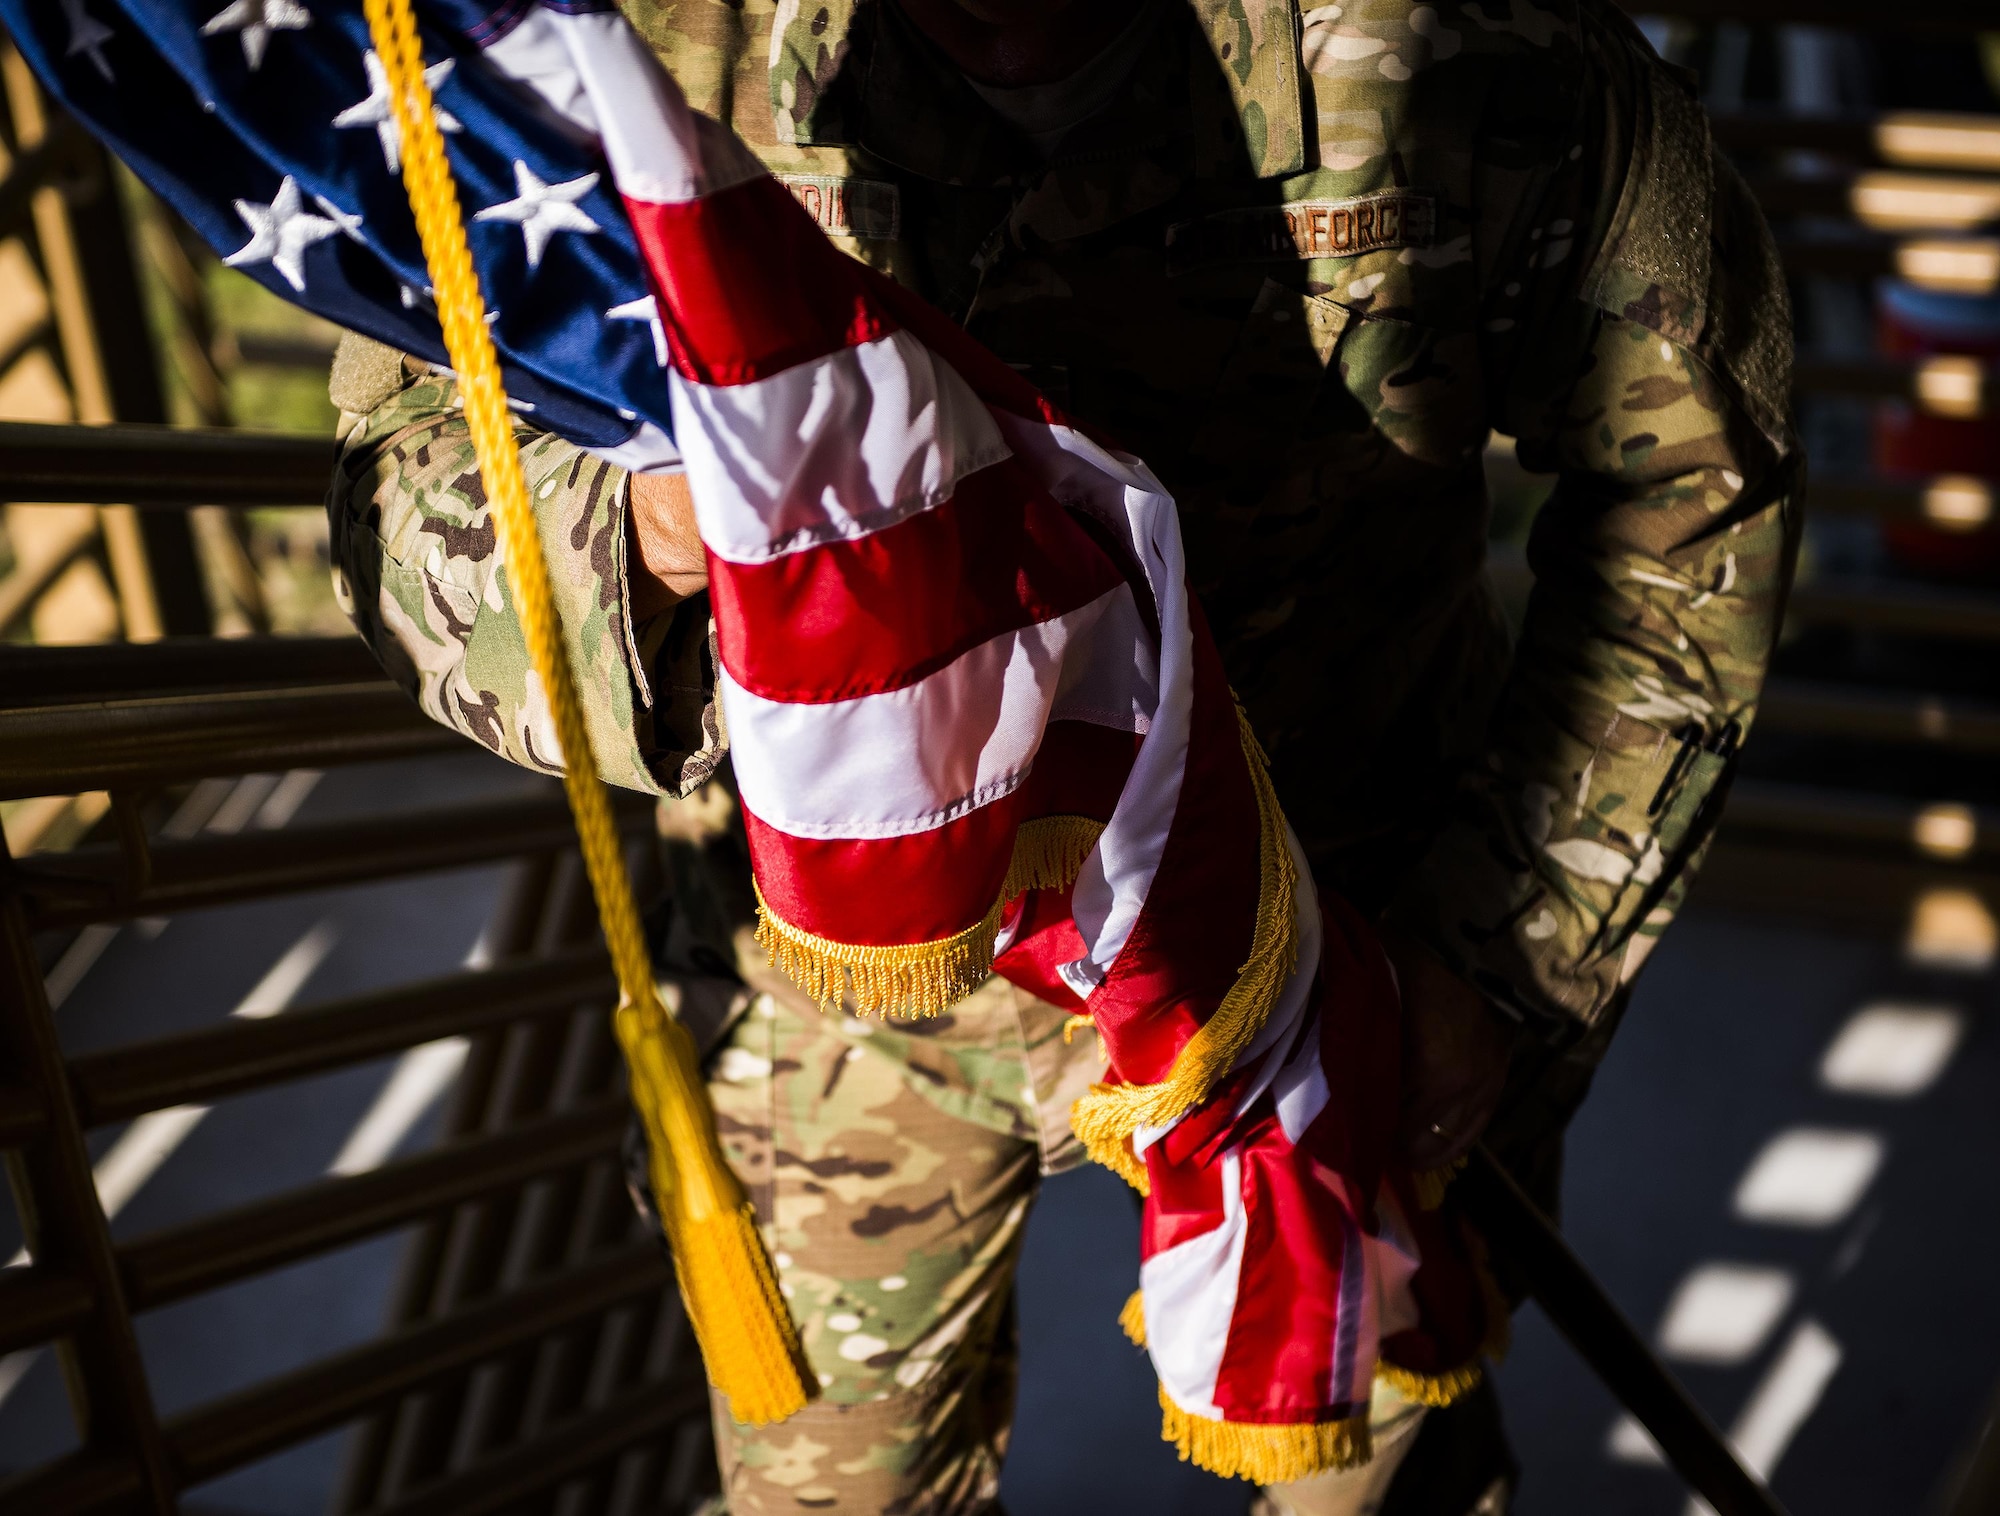 An Airman carries an American flag up a flight of stairs during a 9/11 Memorial Stair Climb event held at Duke Field, Fla., Sept. 10.  The 24-hour climb began at 8:46 a.m. with the 919th Special Operations Wing commander walking the flag up the outside stairwell of the base’s billeting facility.  Wing Airmen took turns walking the flag up and down the stairwell the entire day until it was delivered to a firefighter and security forces color guard at 8:46 a.m. the next morning for a 9/11 Remembrance ceremony. More than 115 Airmen carried the flag throughout the day and night for a total of more than 207,000 steps. (U.S. Air Force photo/Tech. Sgt. Sam King)